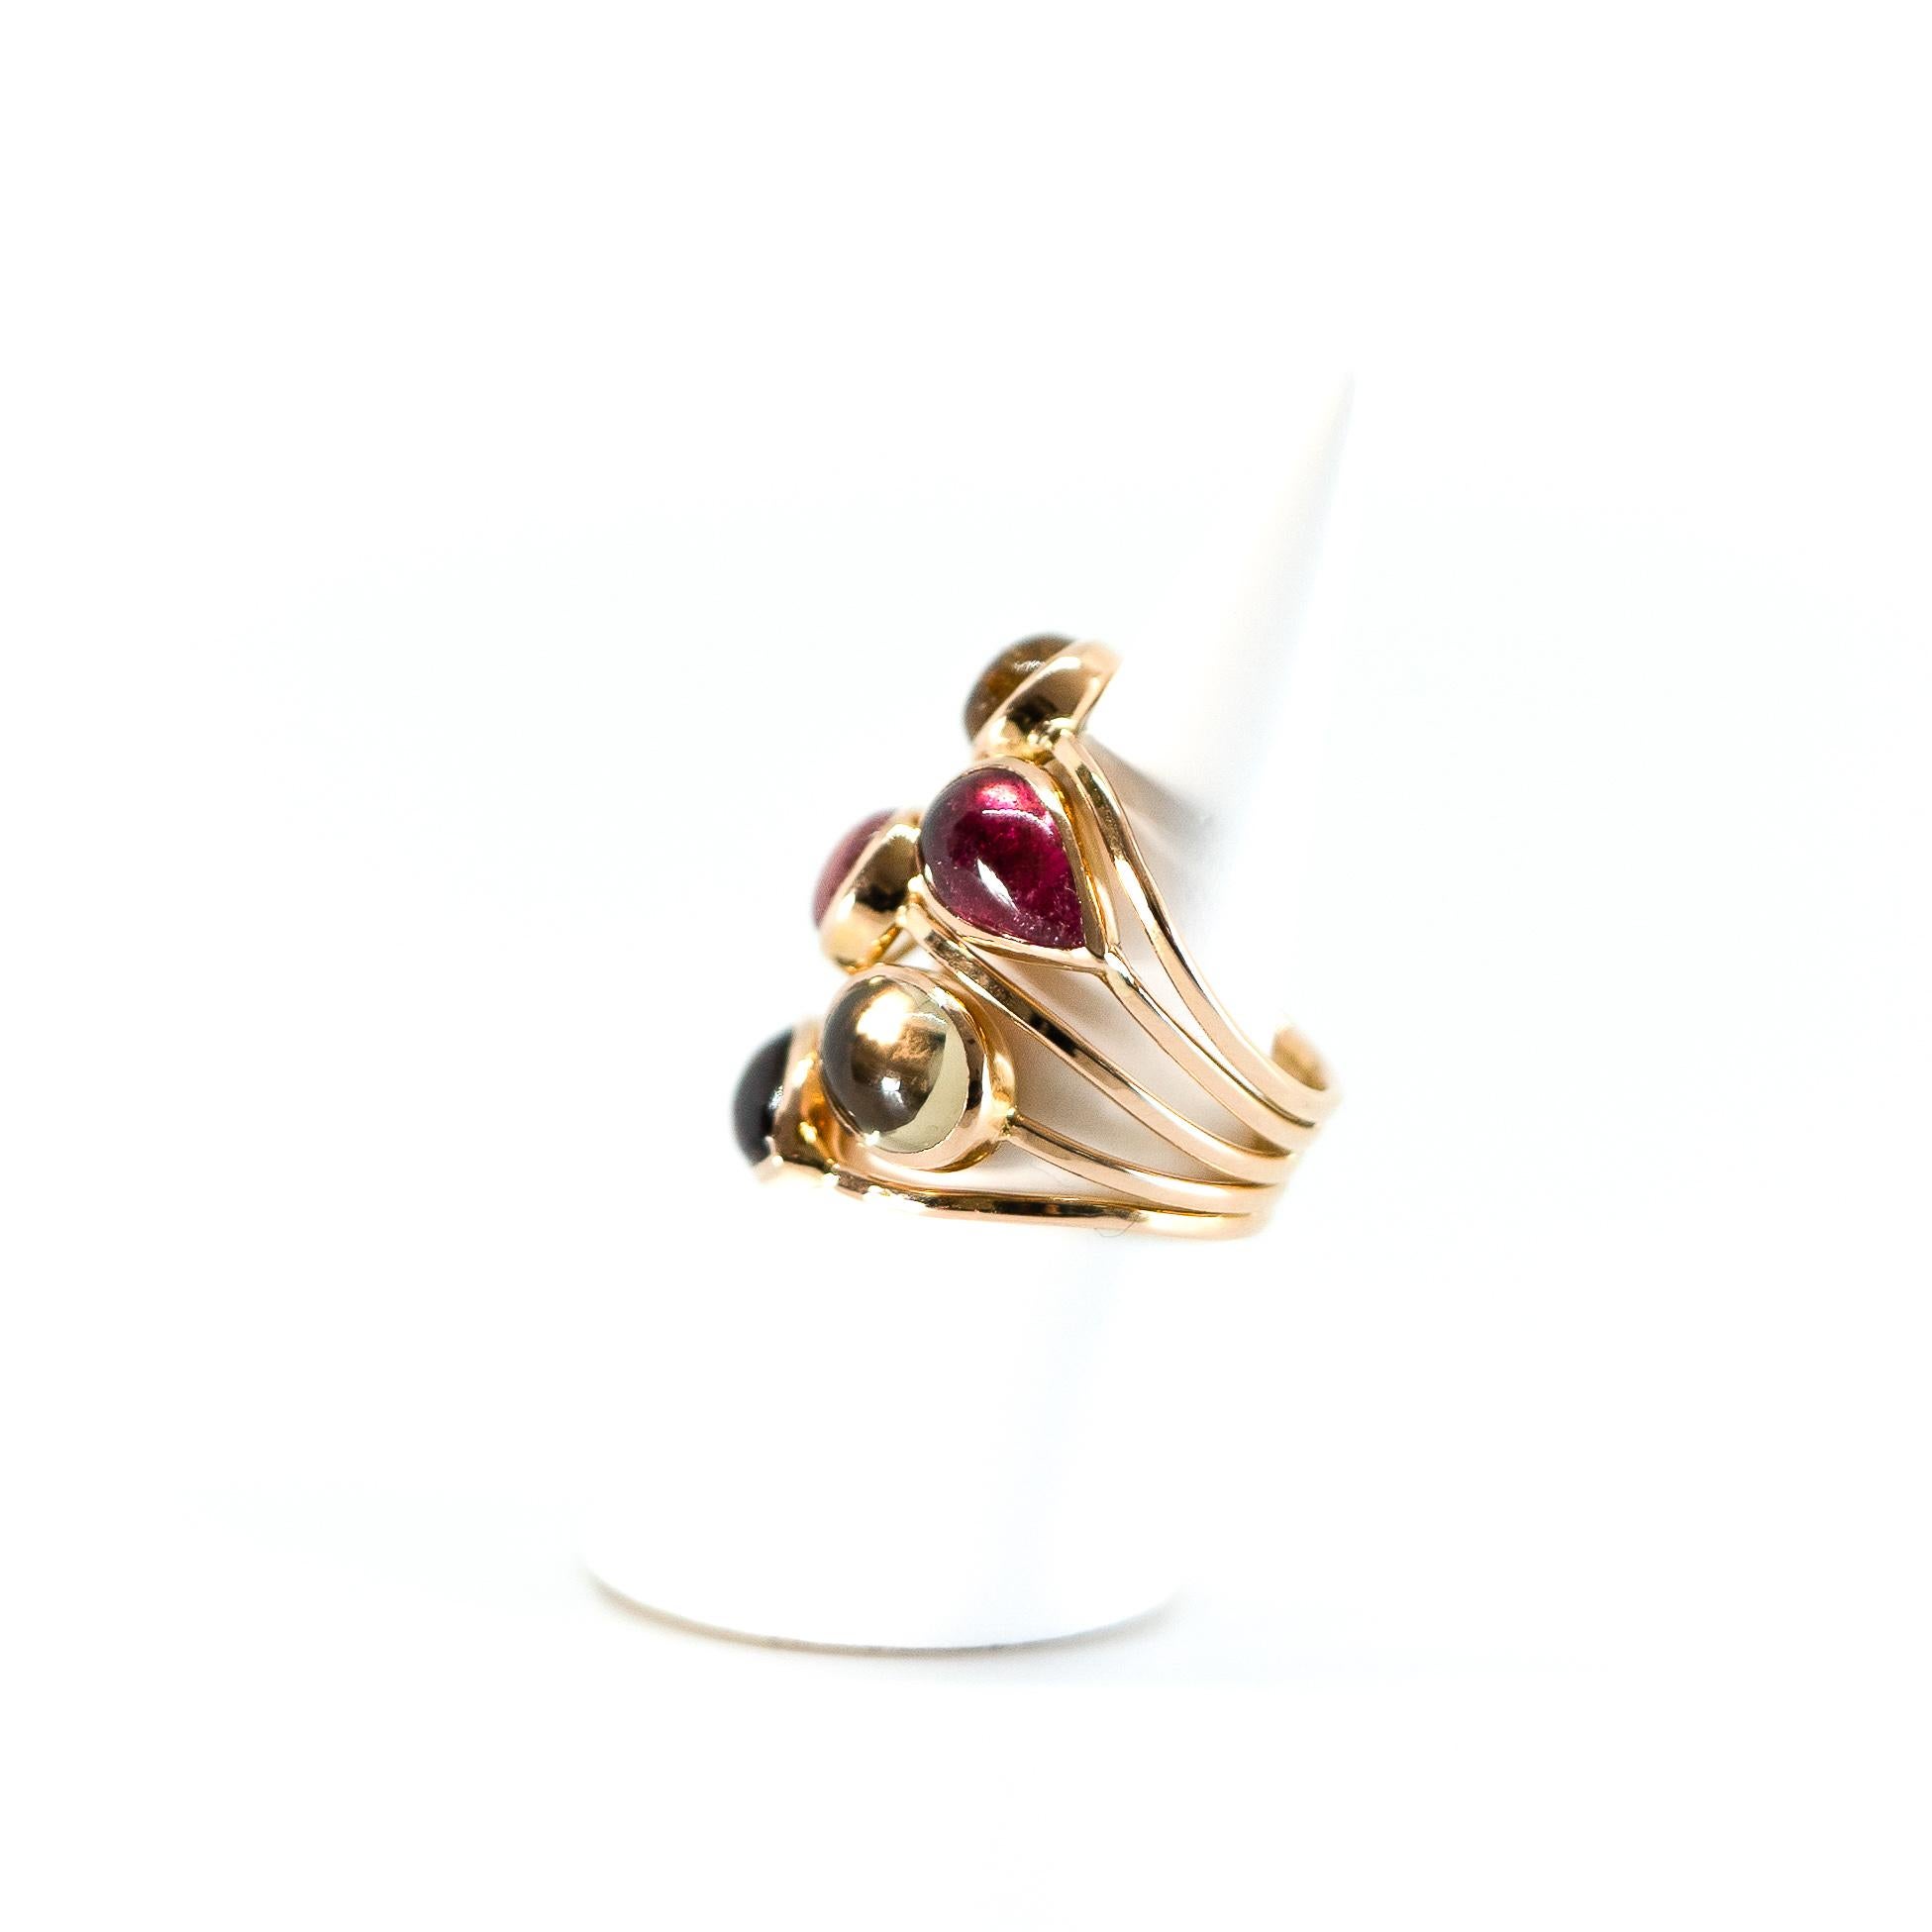 Contemporary 18K Pink Gold Ring Set with Pink and Beige Tourmalines Cameo by Marion Jeantet